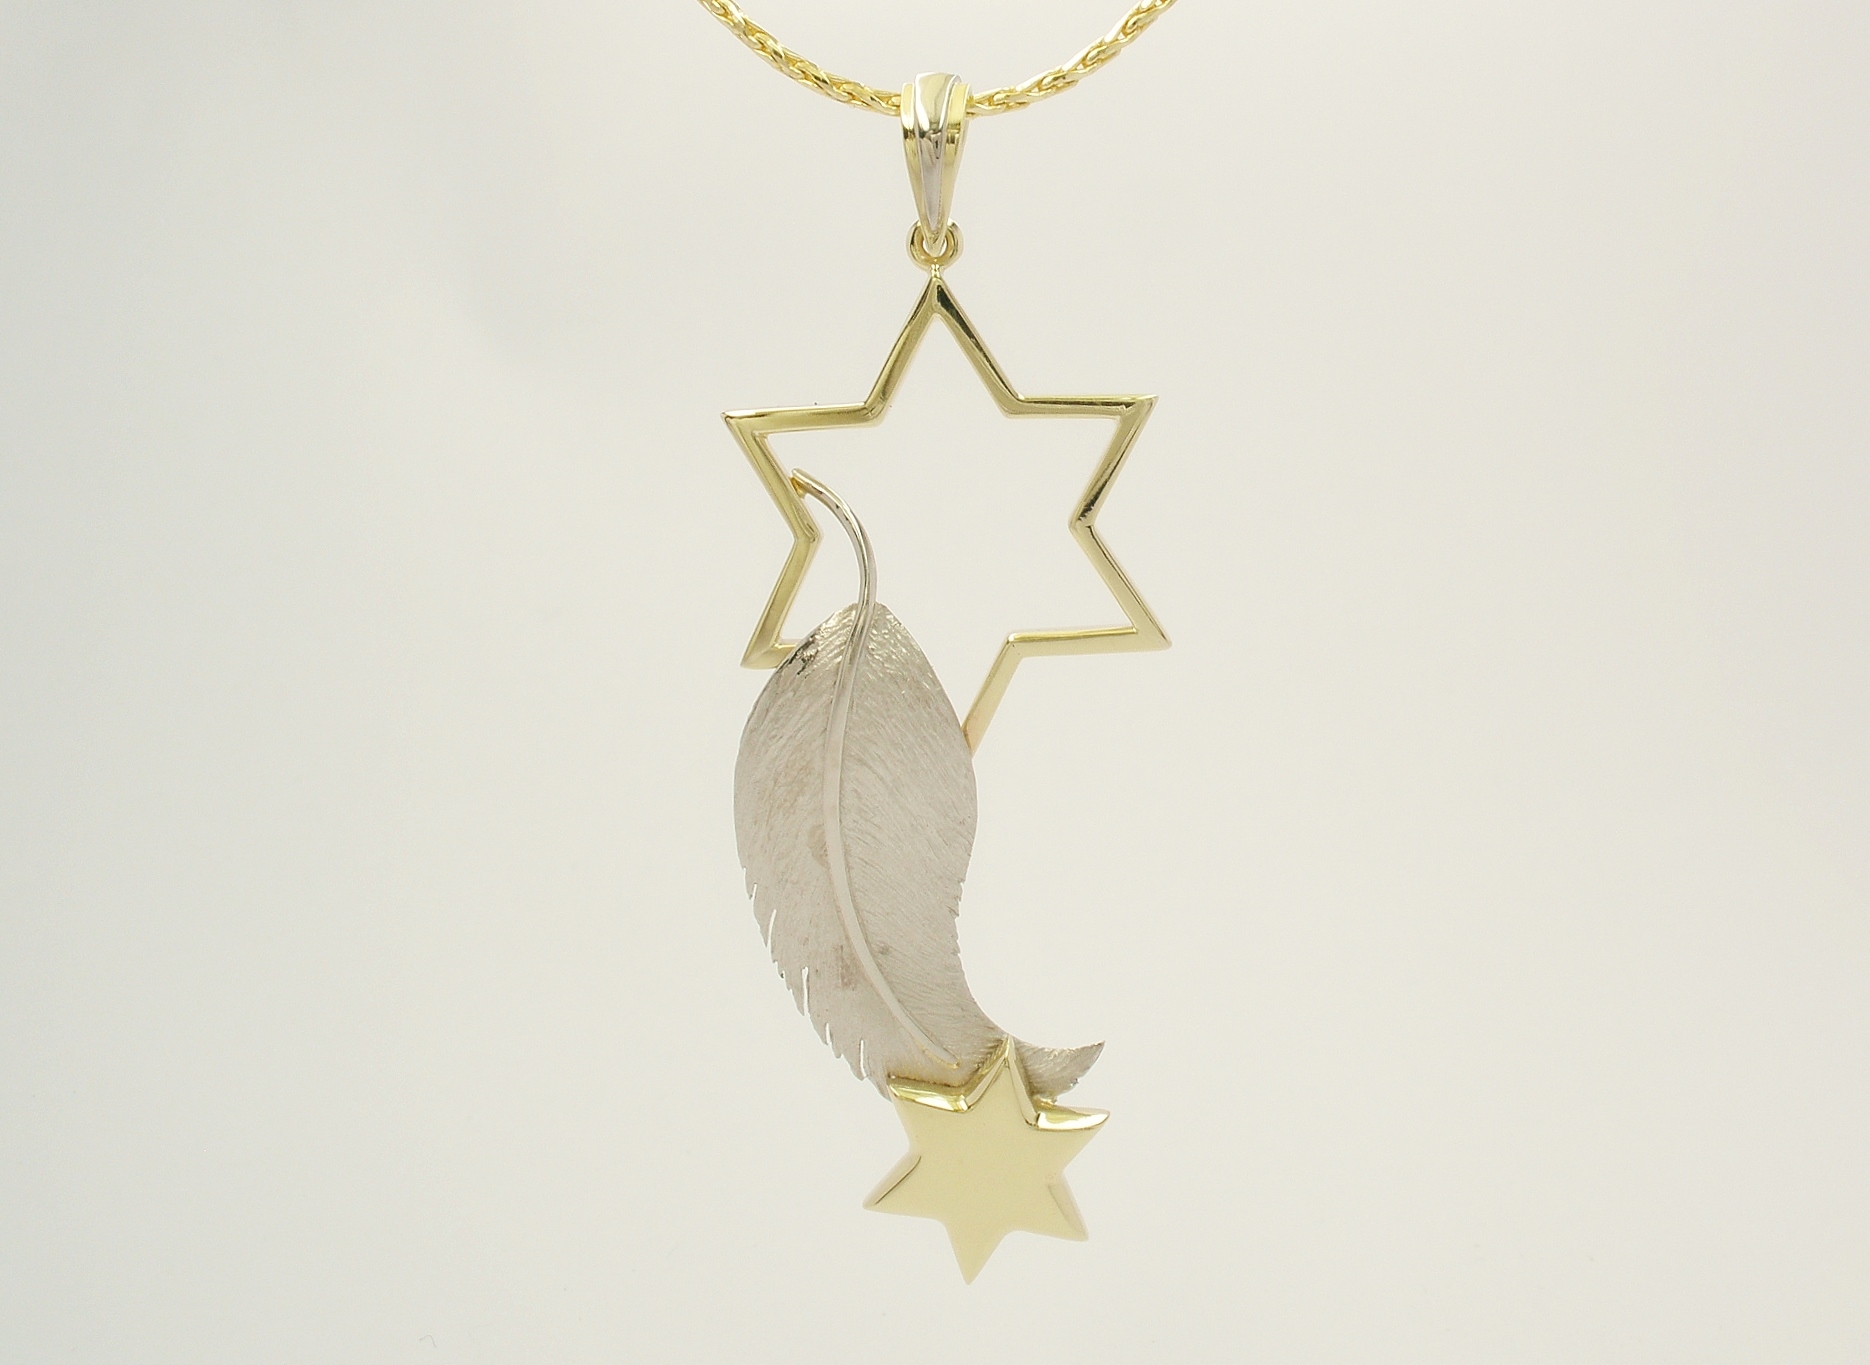 18ct. yellow gold and palladium feather and star pendant.